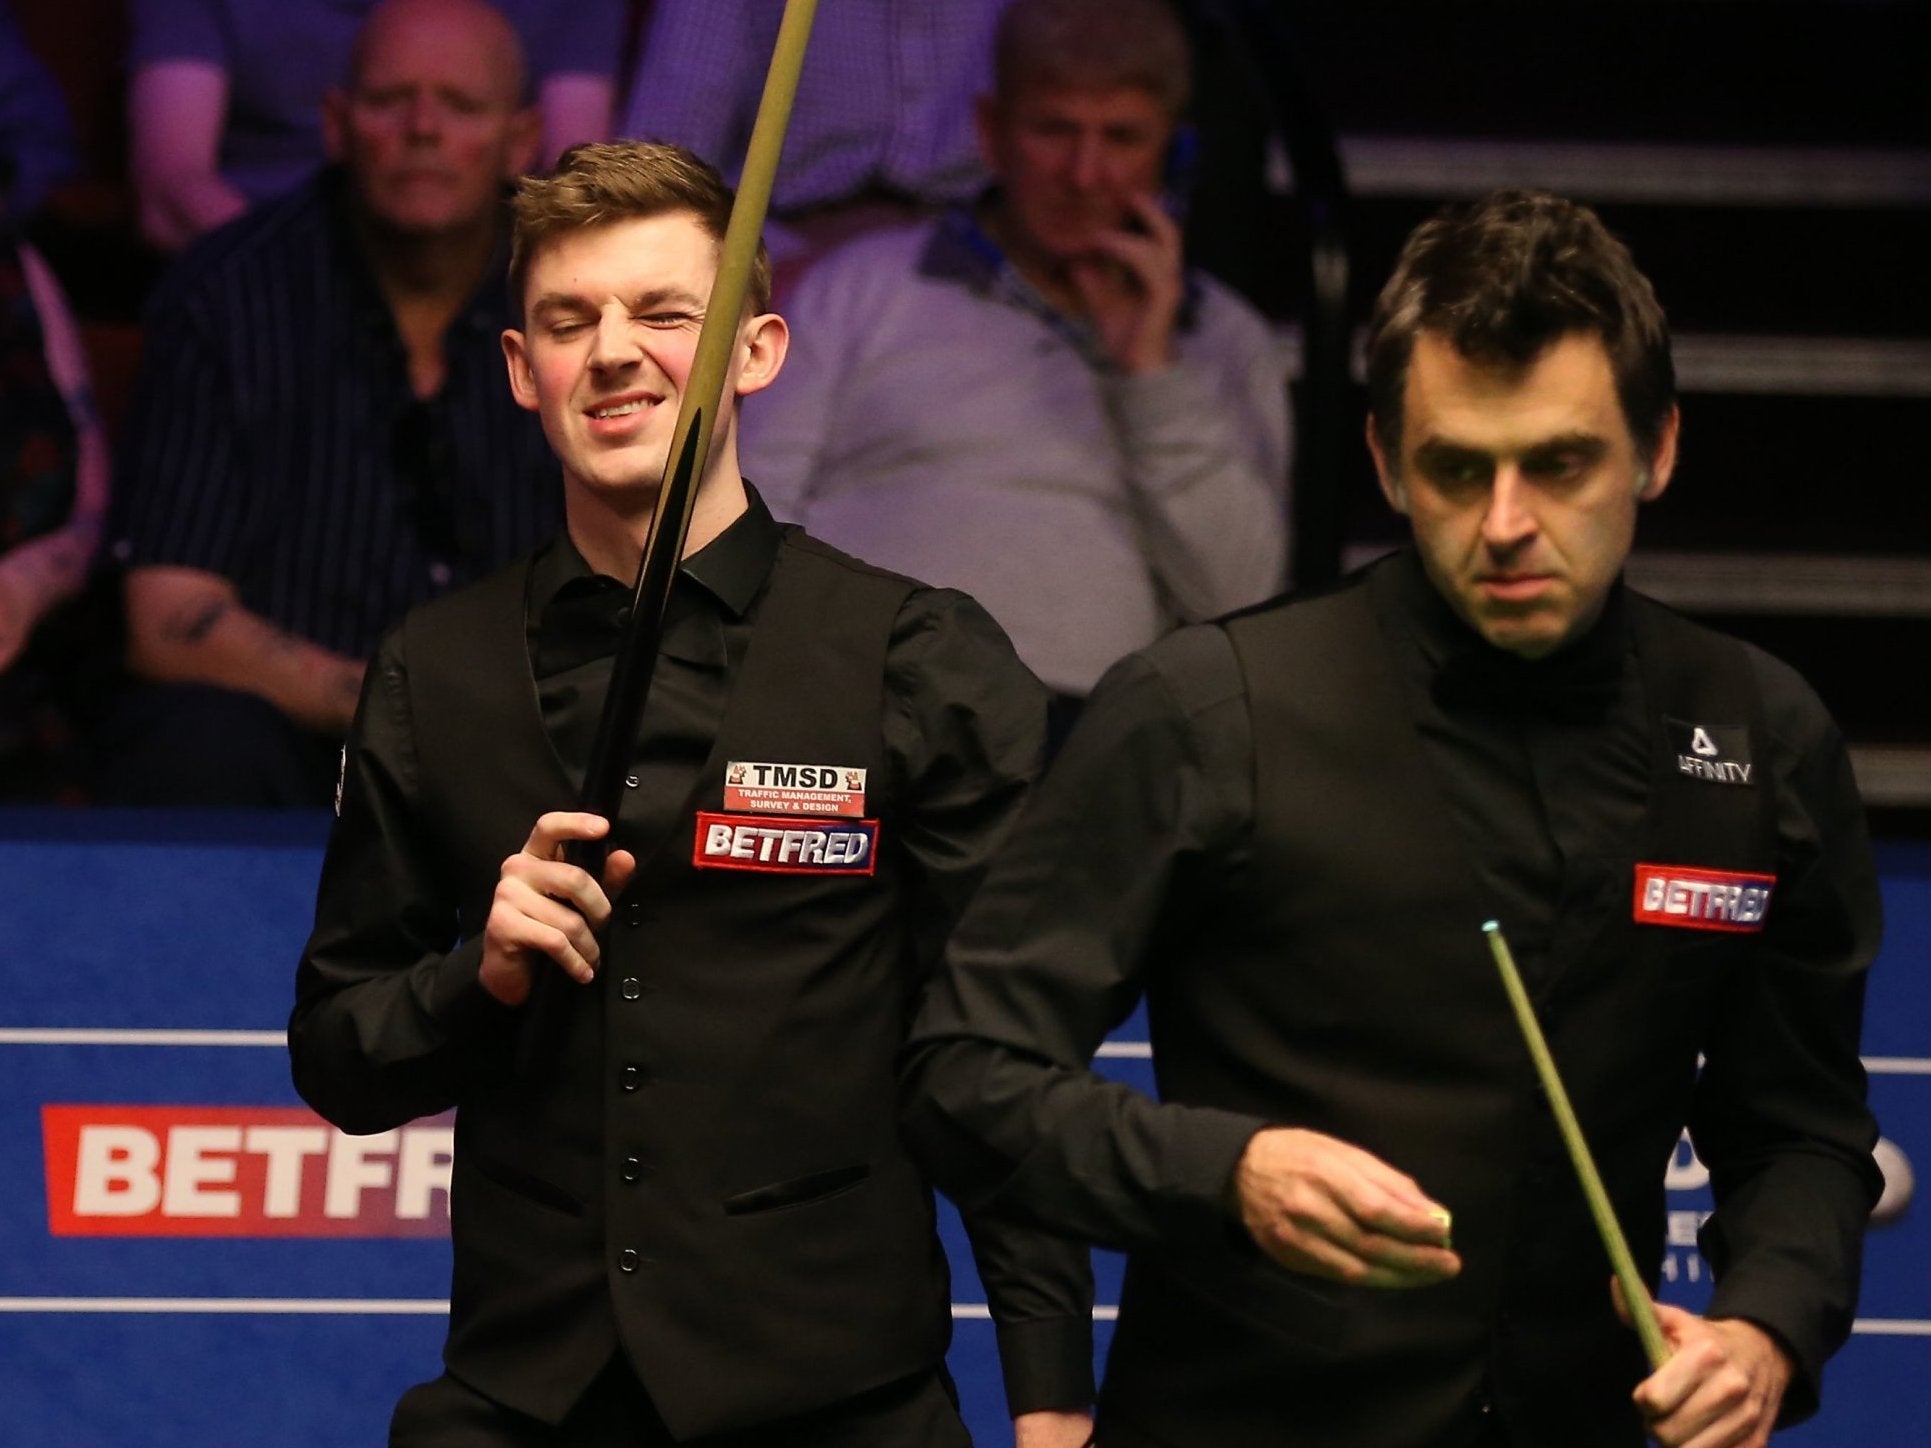 James Cahill will head into day four of the World Snooker Championship leading Ronnie O'Sullivan 5-4